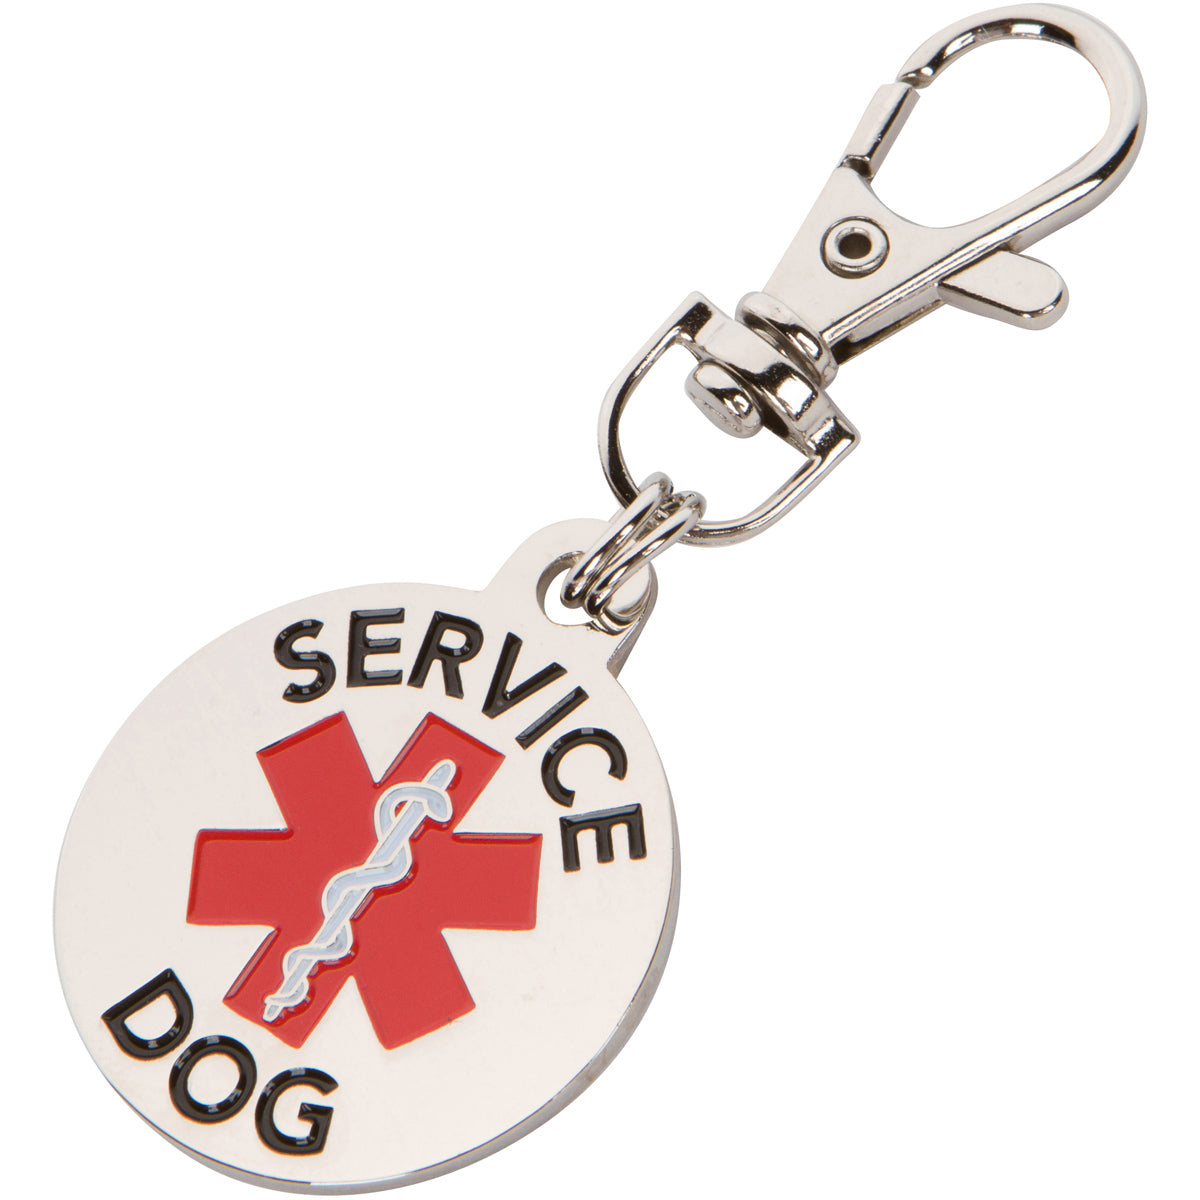 Service Dog Tag Small Breed Double Sided Red Medical Alert Symbol .999 inch ID Tag. Easily Switch Between Service Dog Vest Collars and Harness - K9King